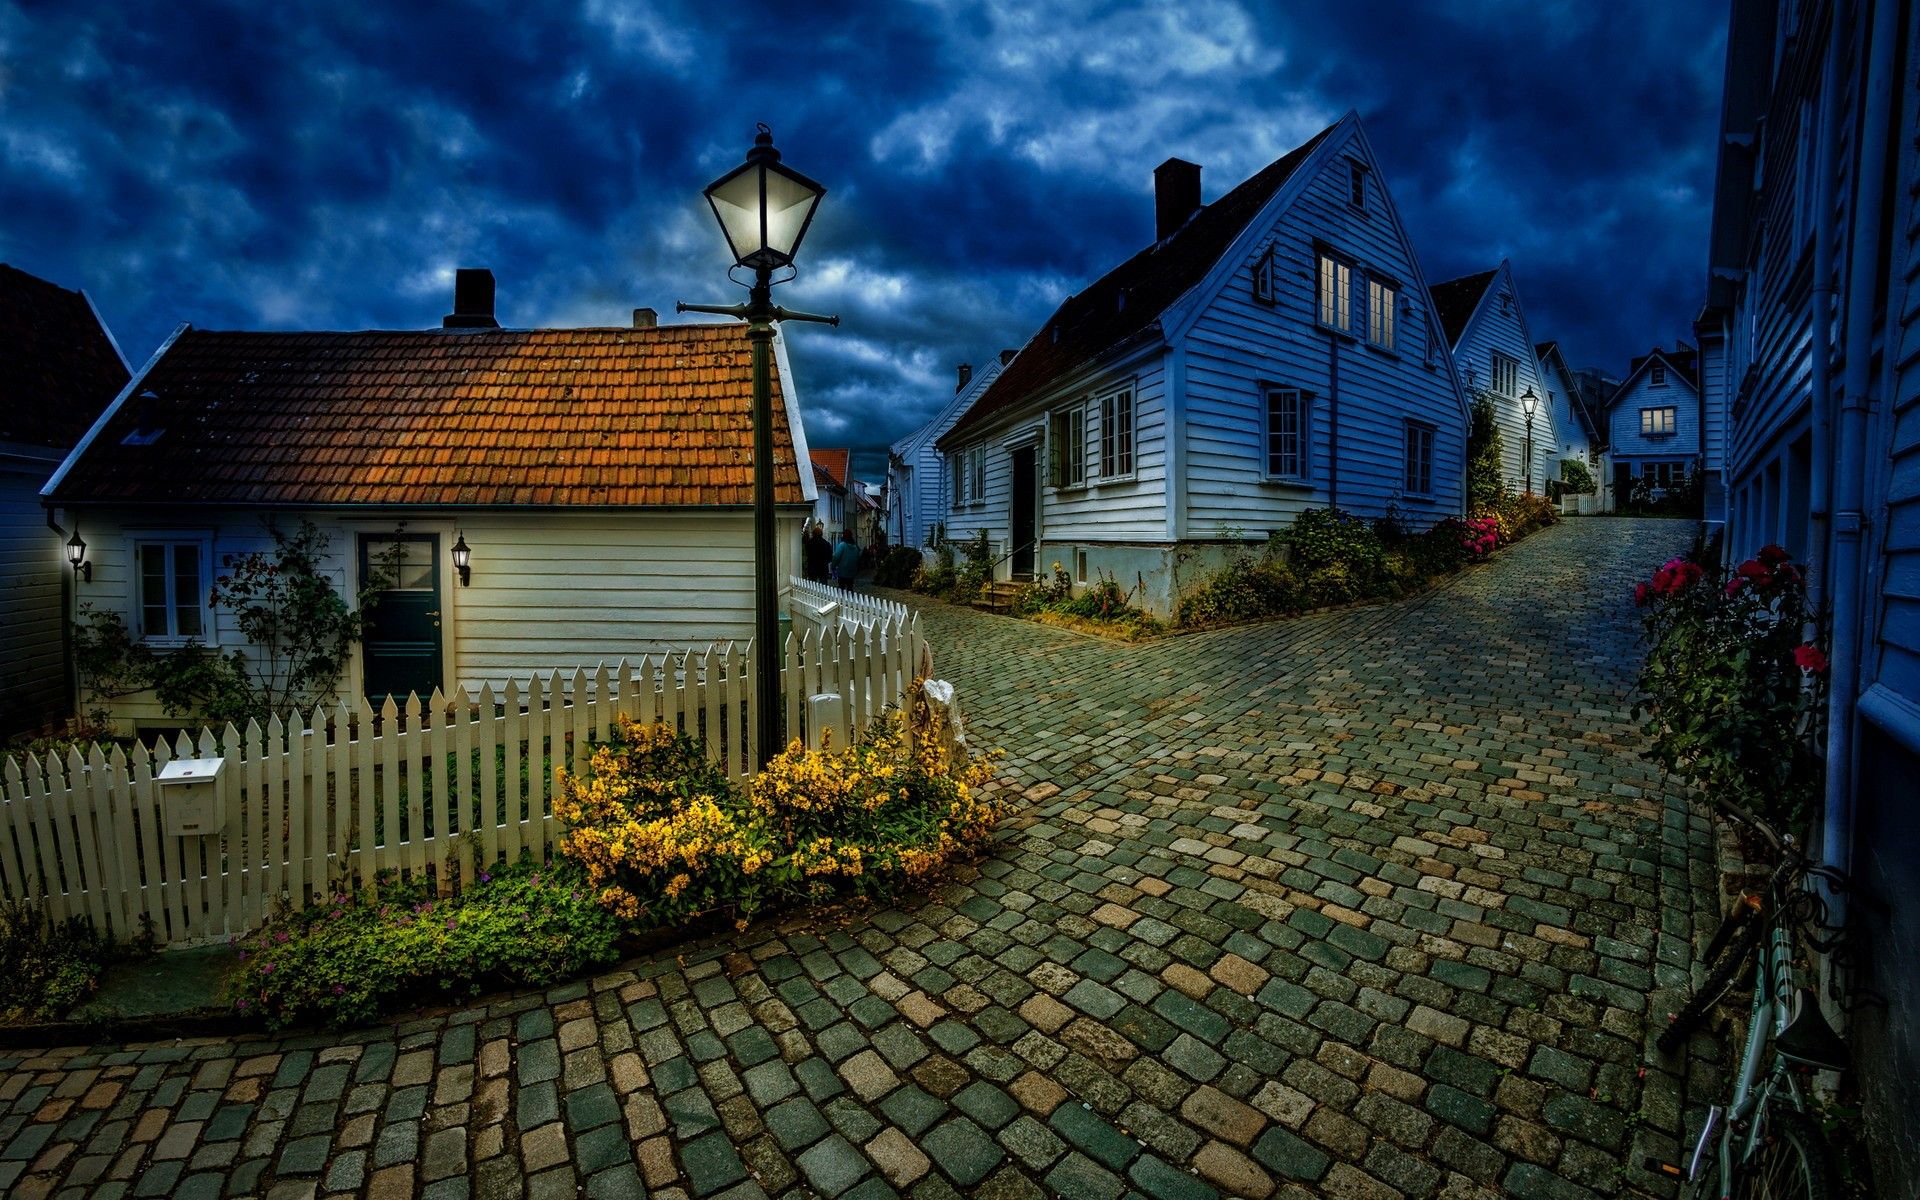 Wallpaper, street light, night, architecture, nature, building, clouds, house, hills, Norway, village, evening, fence, cottage, estate, home, mansion, suburb, screenshot, residential area, landscape lighting 1920x1200